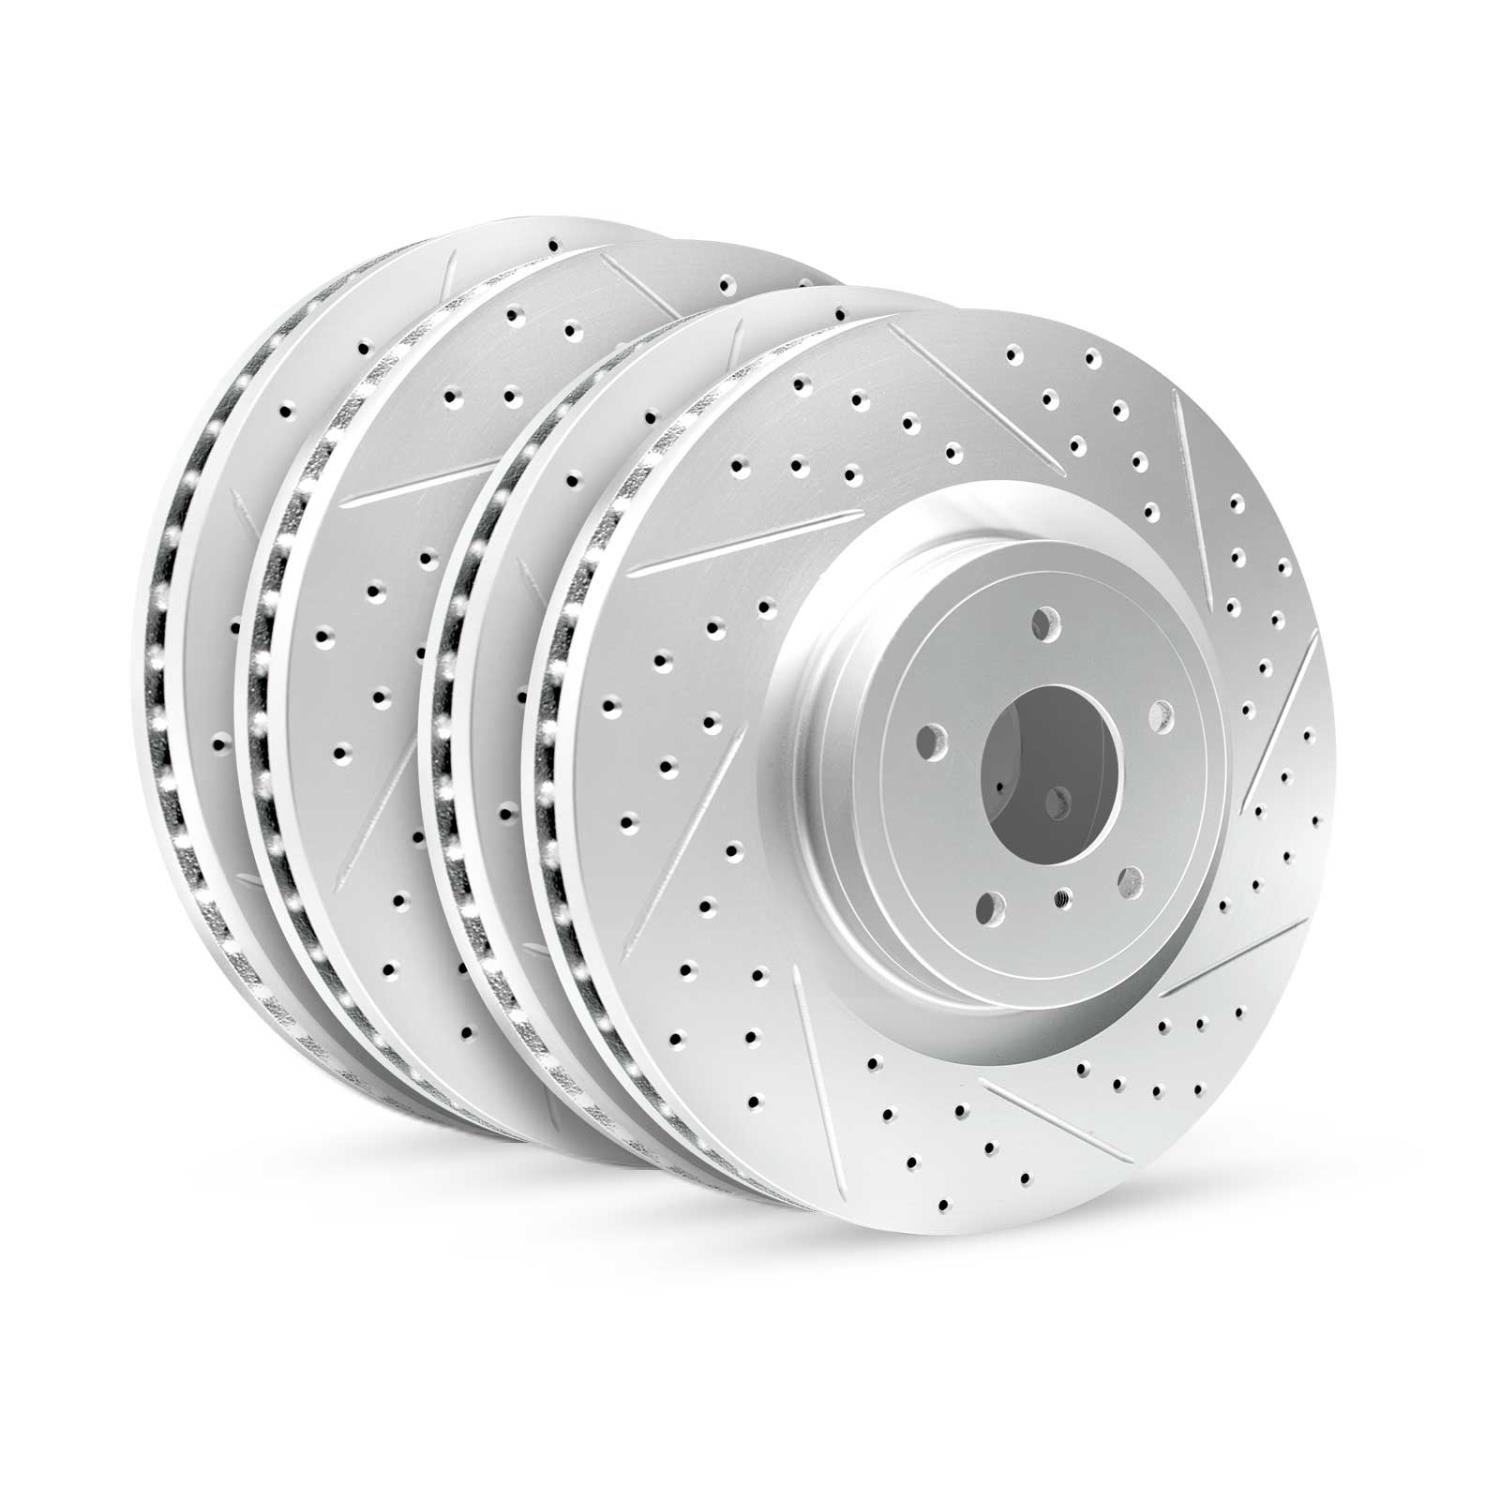 GEO-Carbon Drilled/Slotted Rotors, 2000-2004 Lexus/Toyota/Scion, Position: Front/Rear